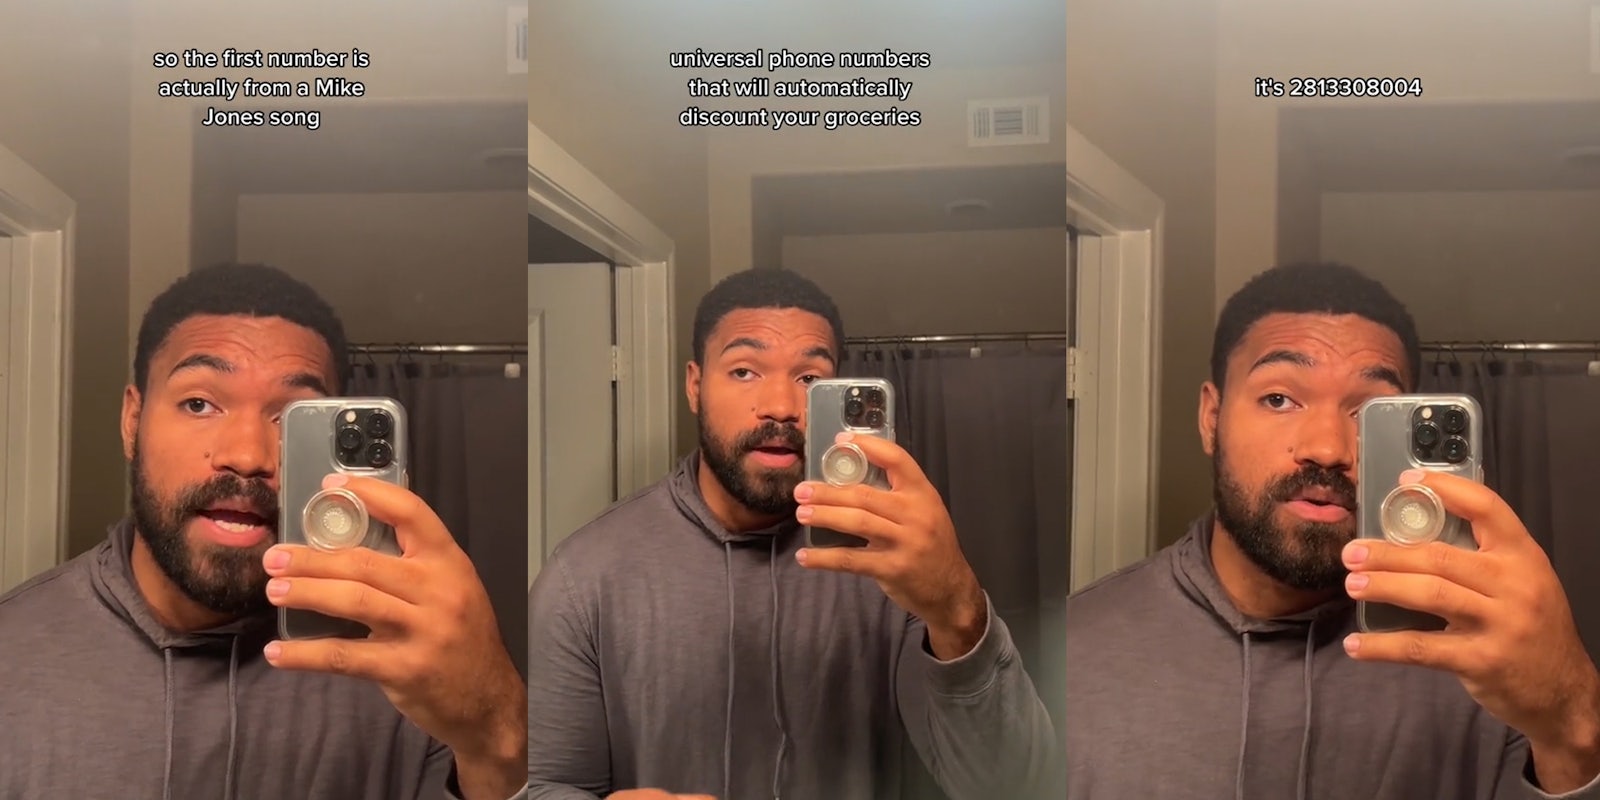 Man speaking in bathroom mirror with caption 'so the first number is actually from a Mike Jones song' (l) Man speaking in bathroom mirror with caption 'universal phone numbers that will automatically discount your groceries' (c) Man speaking in bathroom mirror with caption 'it's 2813308004' (r)